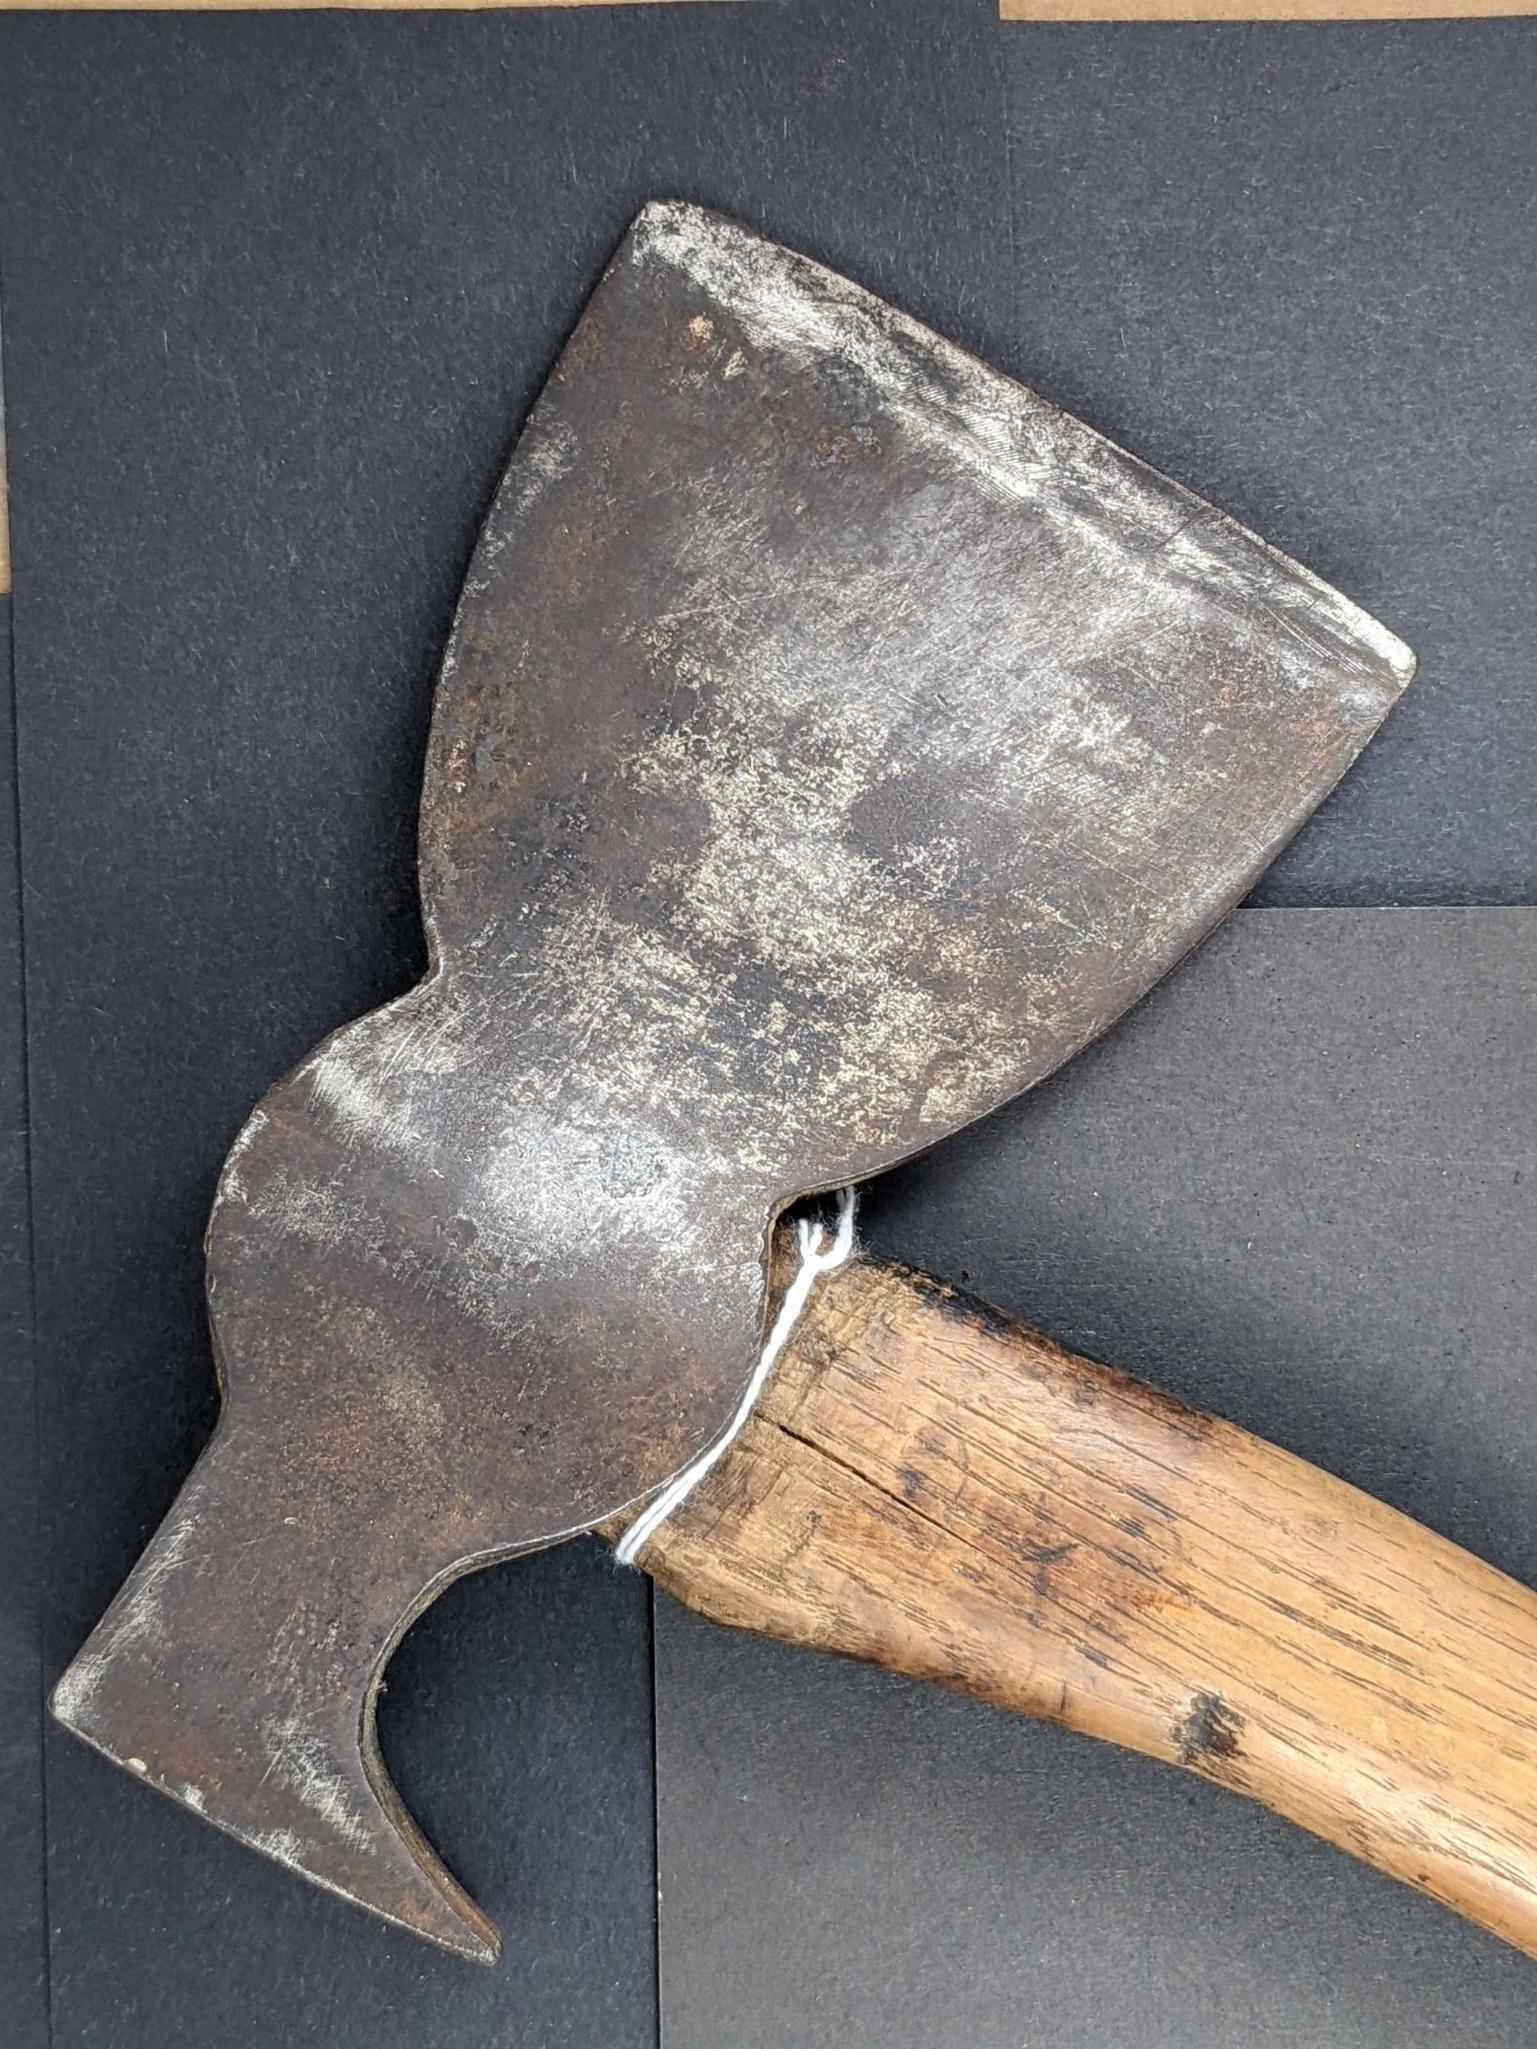 Winchester fencing or farmstead hatchet is 13-3/4" overall. Head is marked 'Winchester Trademark